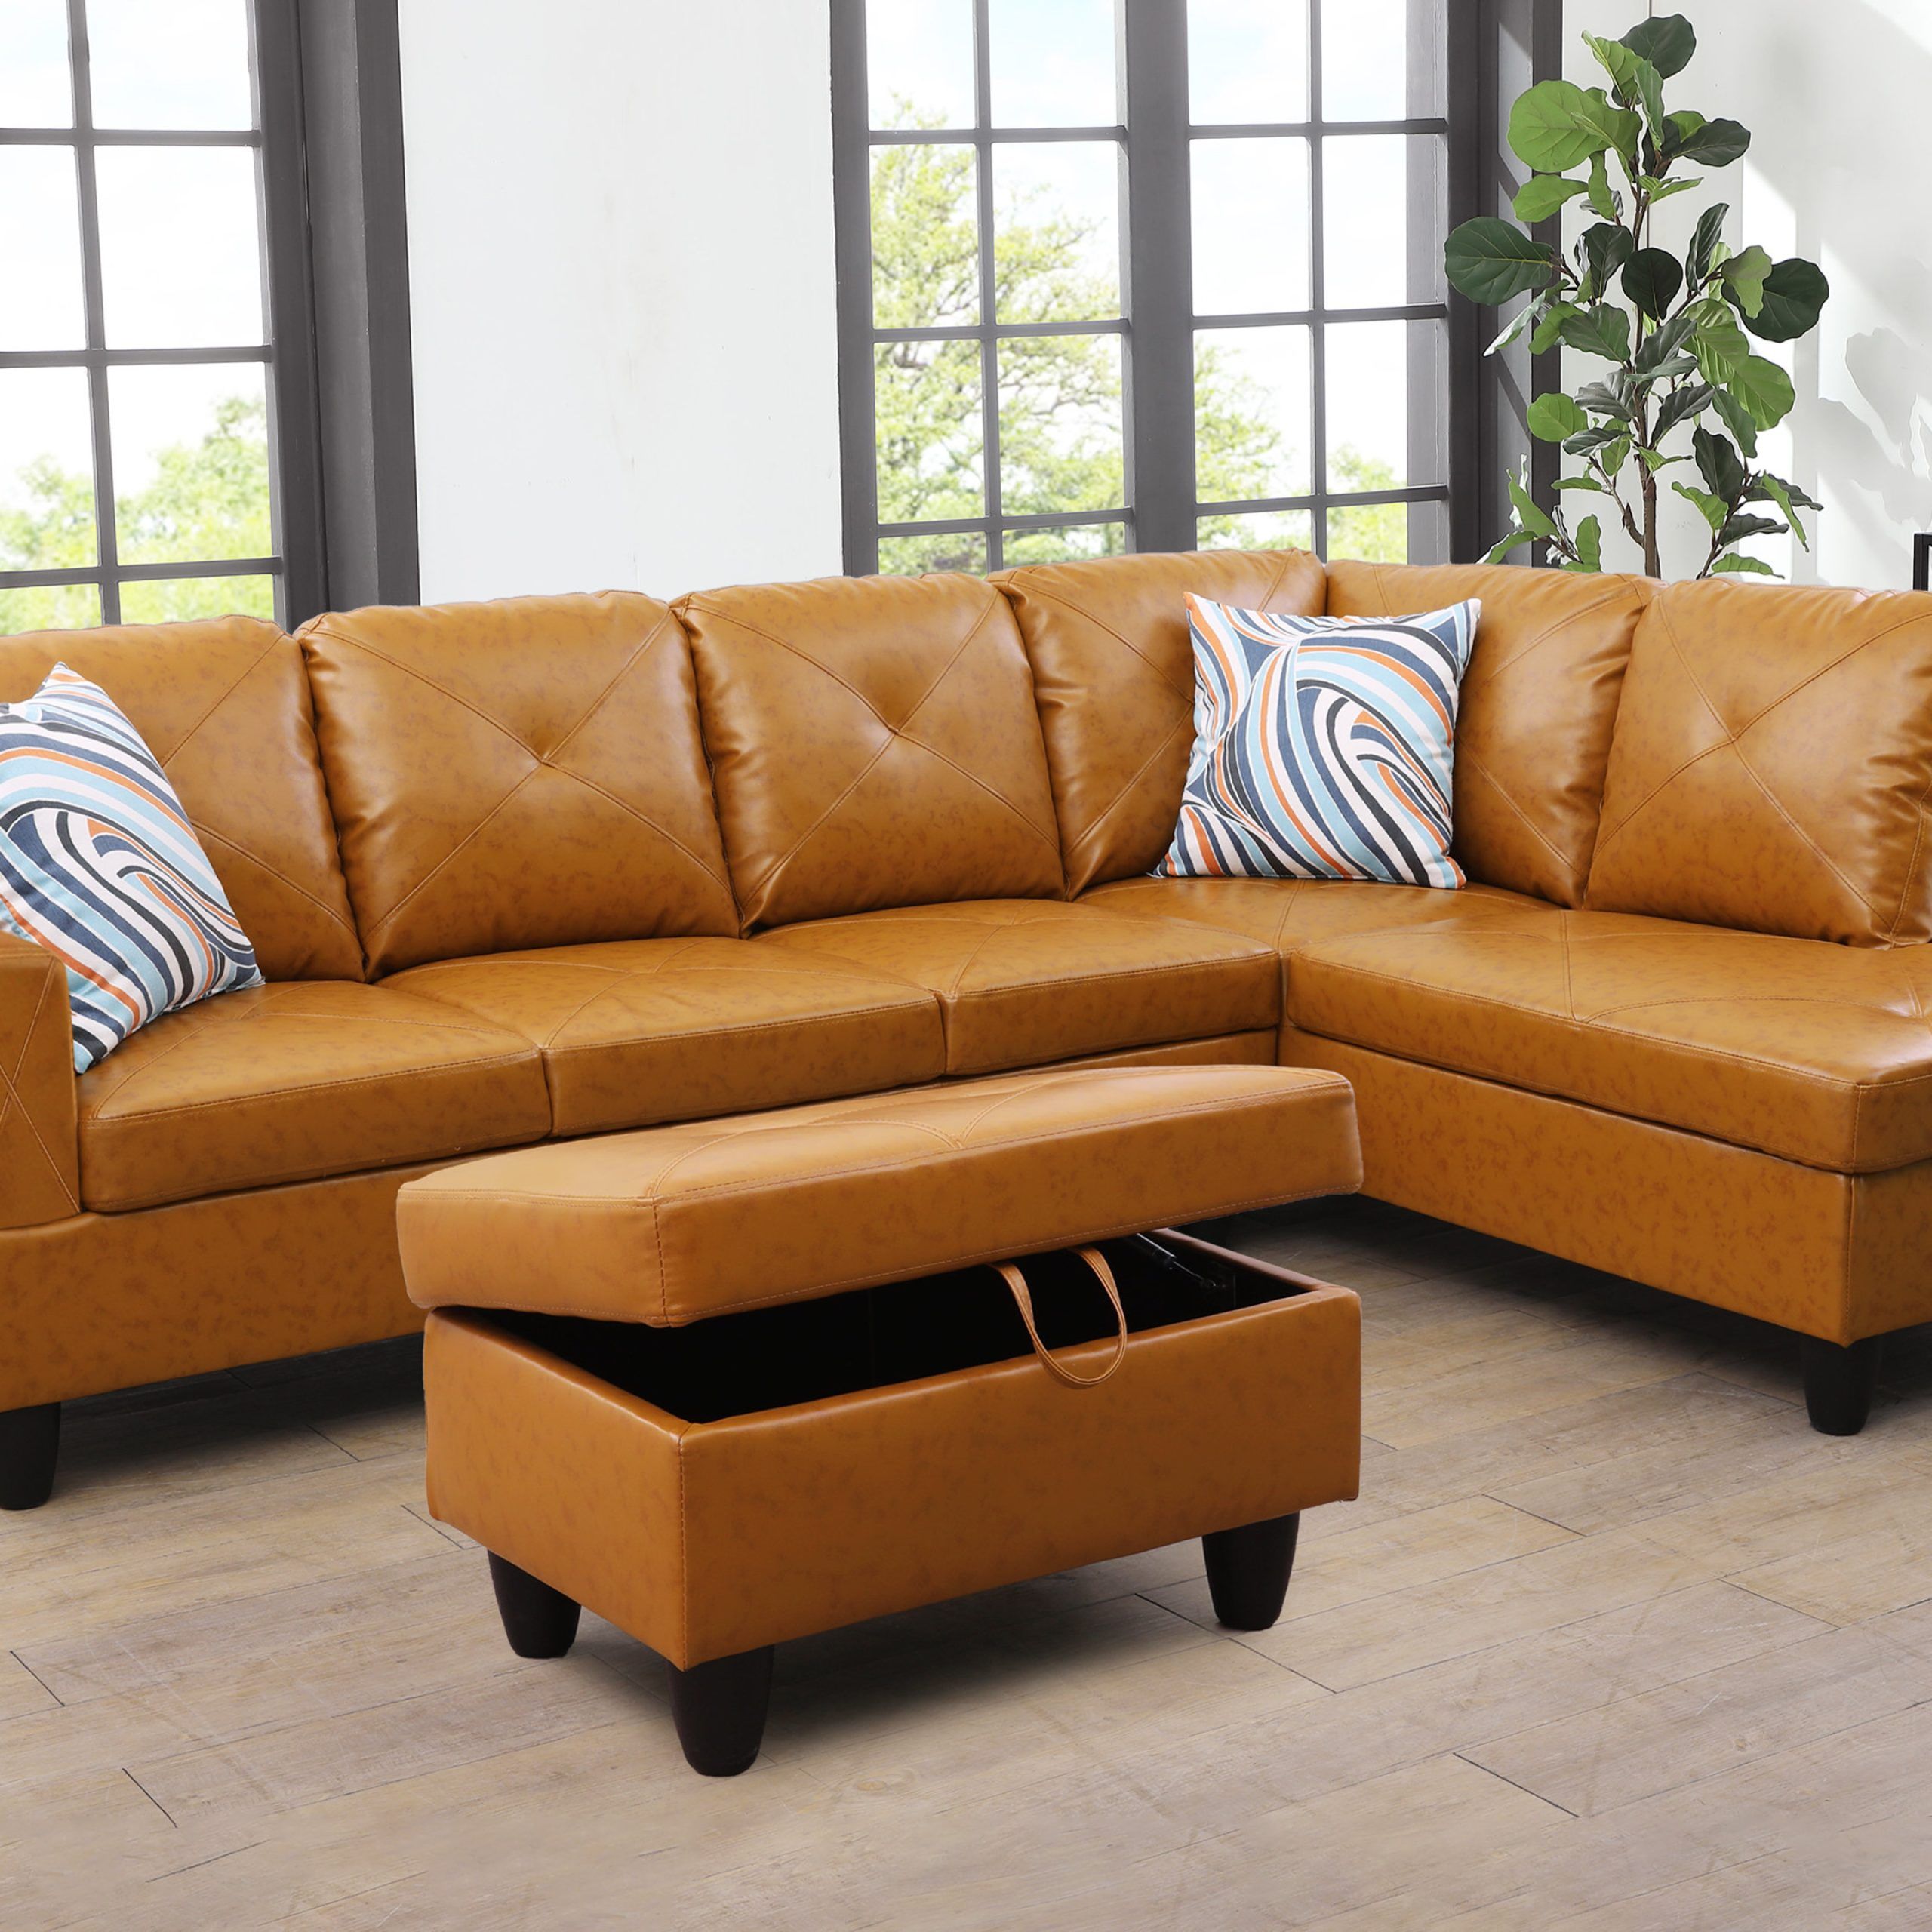 Ebern Designs 3 – Piece Vegan Leather Sectional & Reviews | Wayfair With 3 Piece Leather Sectional Sofa Sets (View 3 of 15)